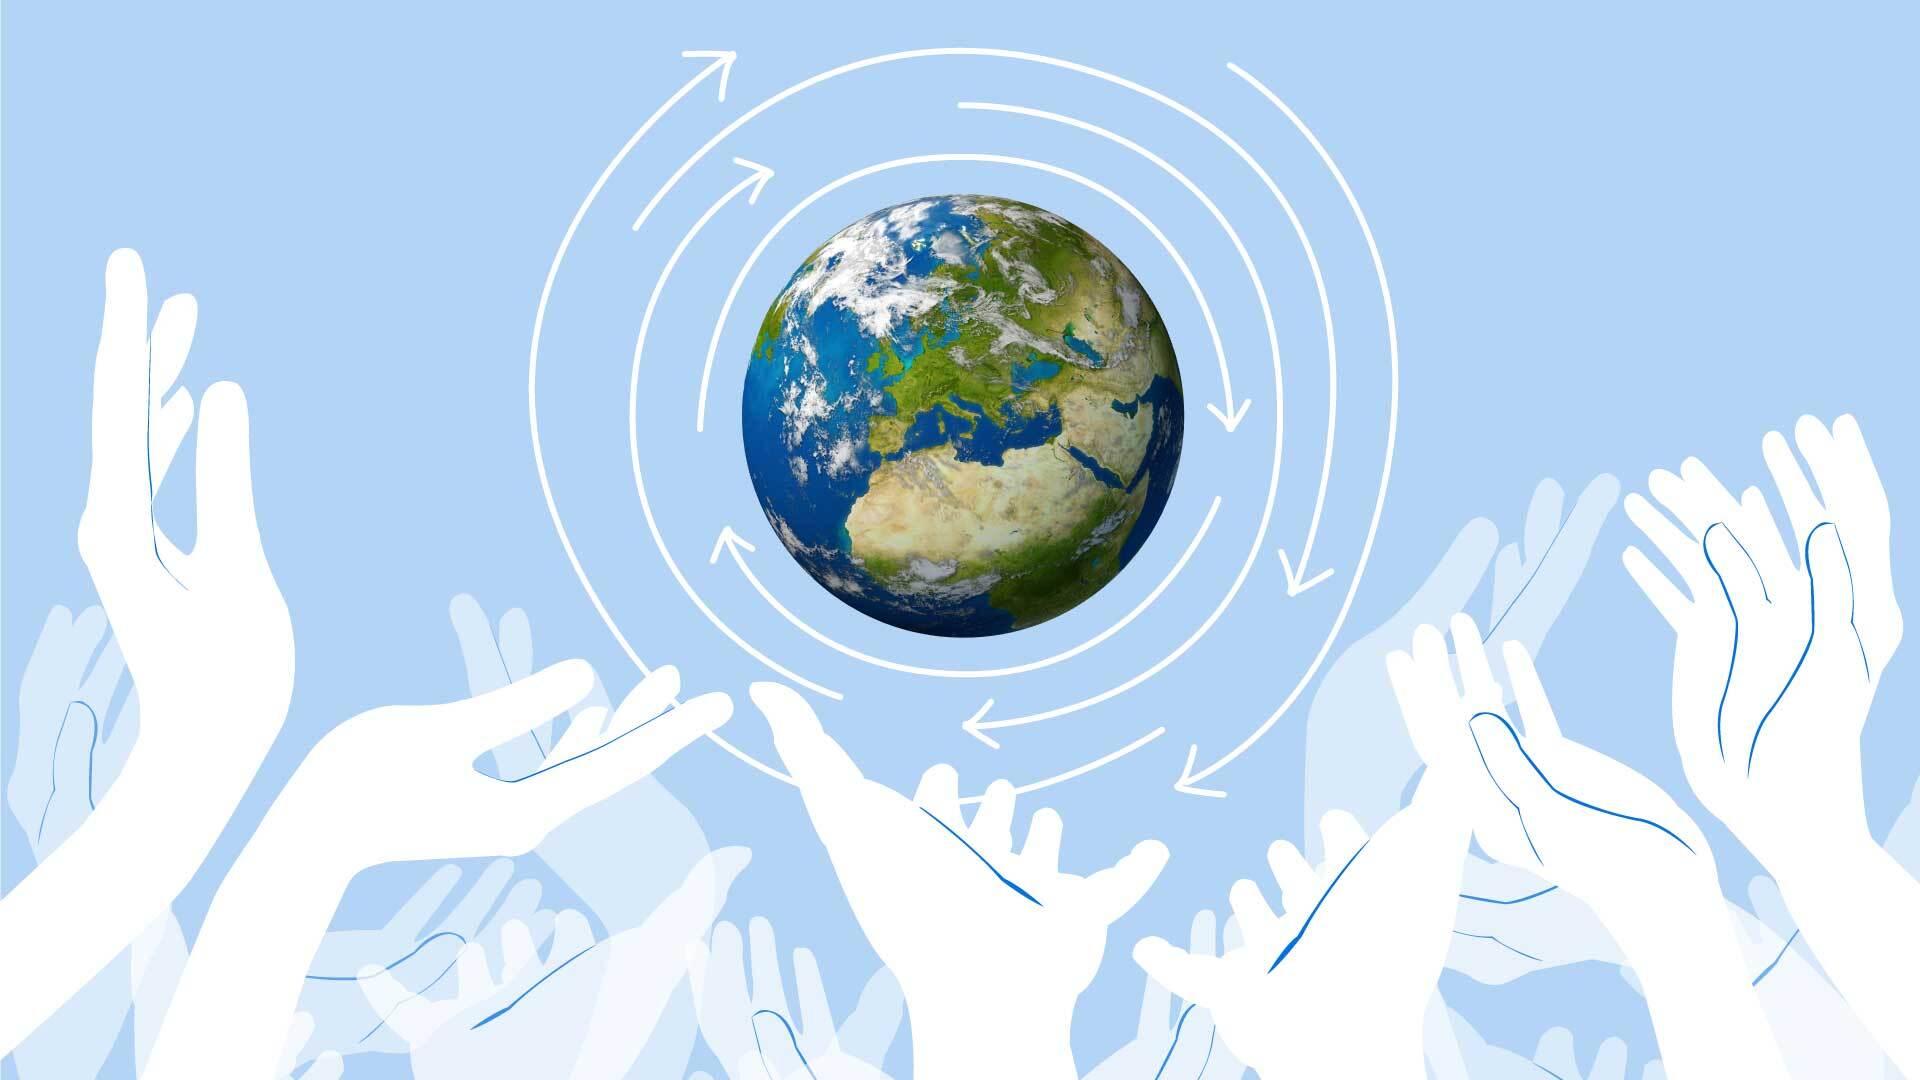 Illustration of hands reaching up to a globe